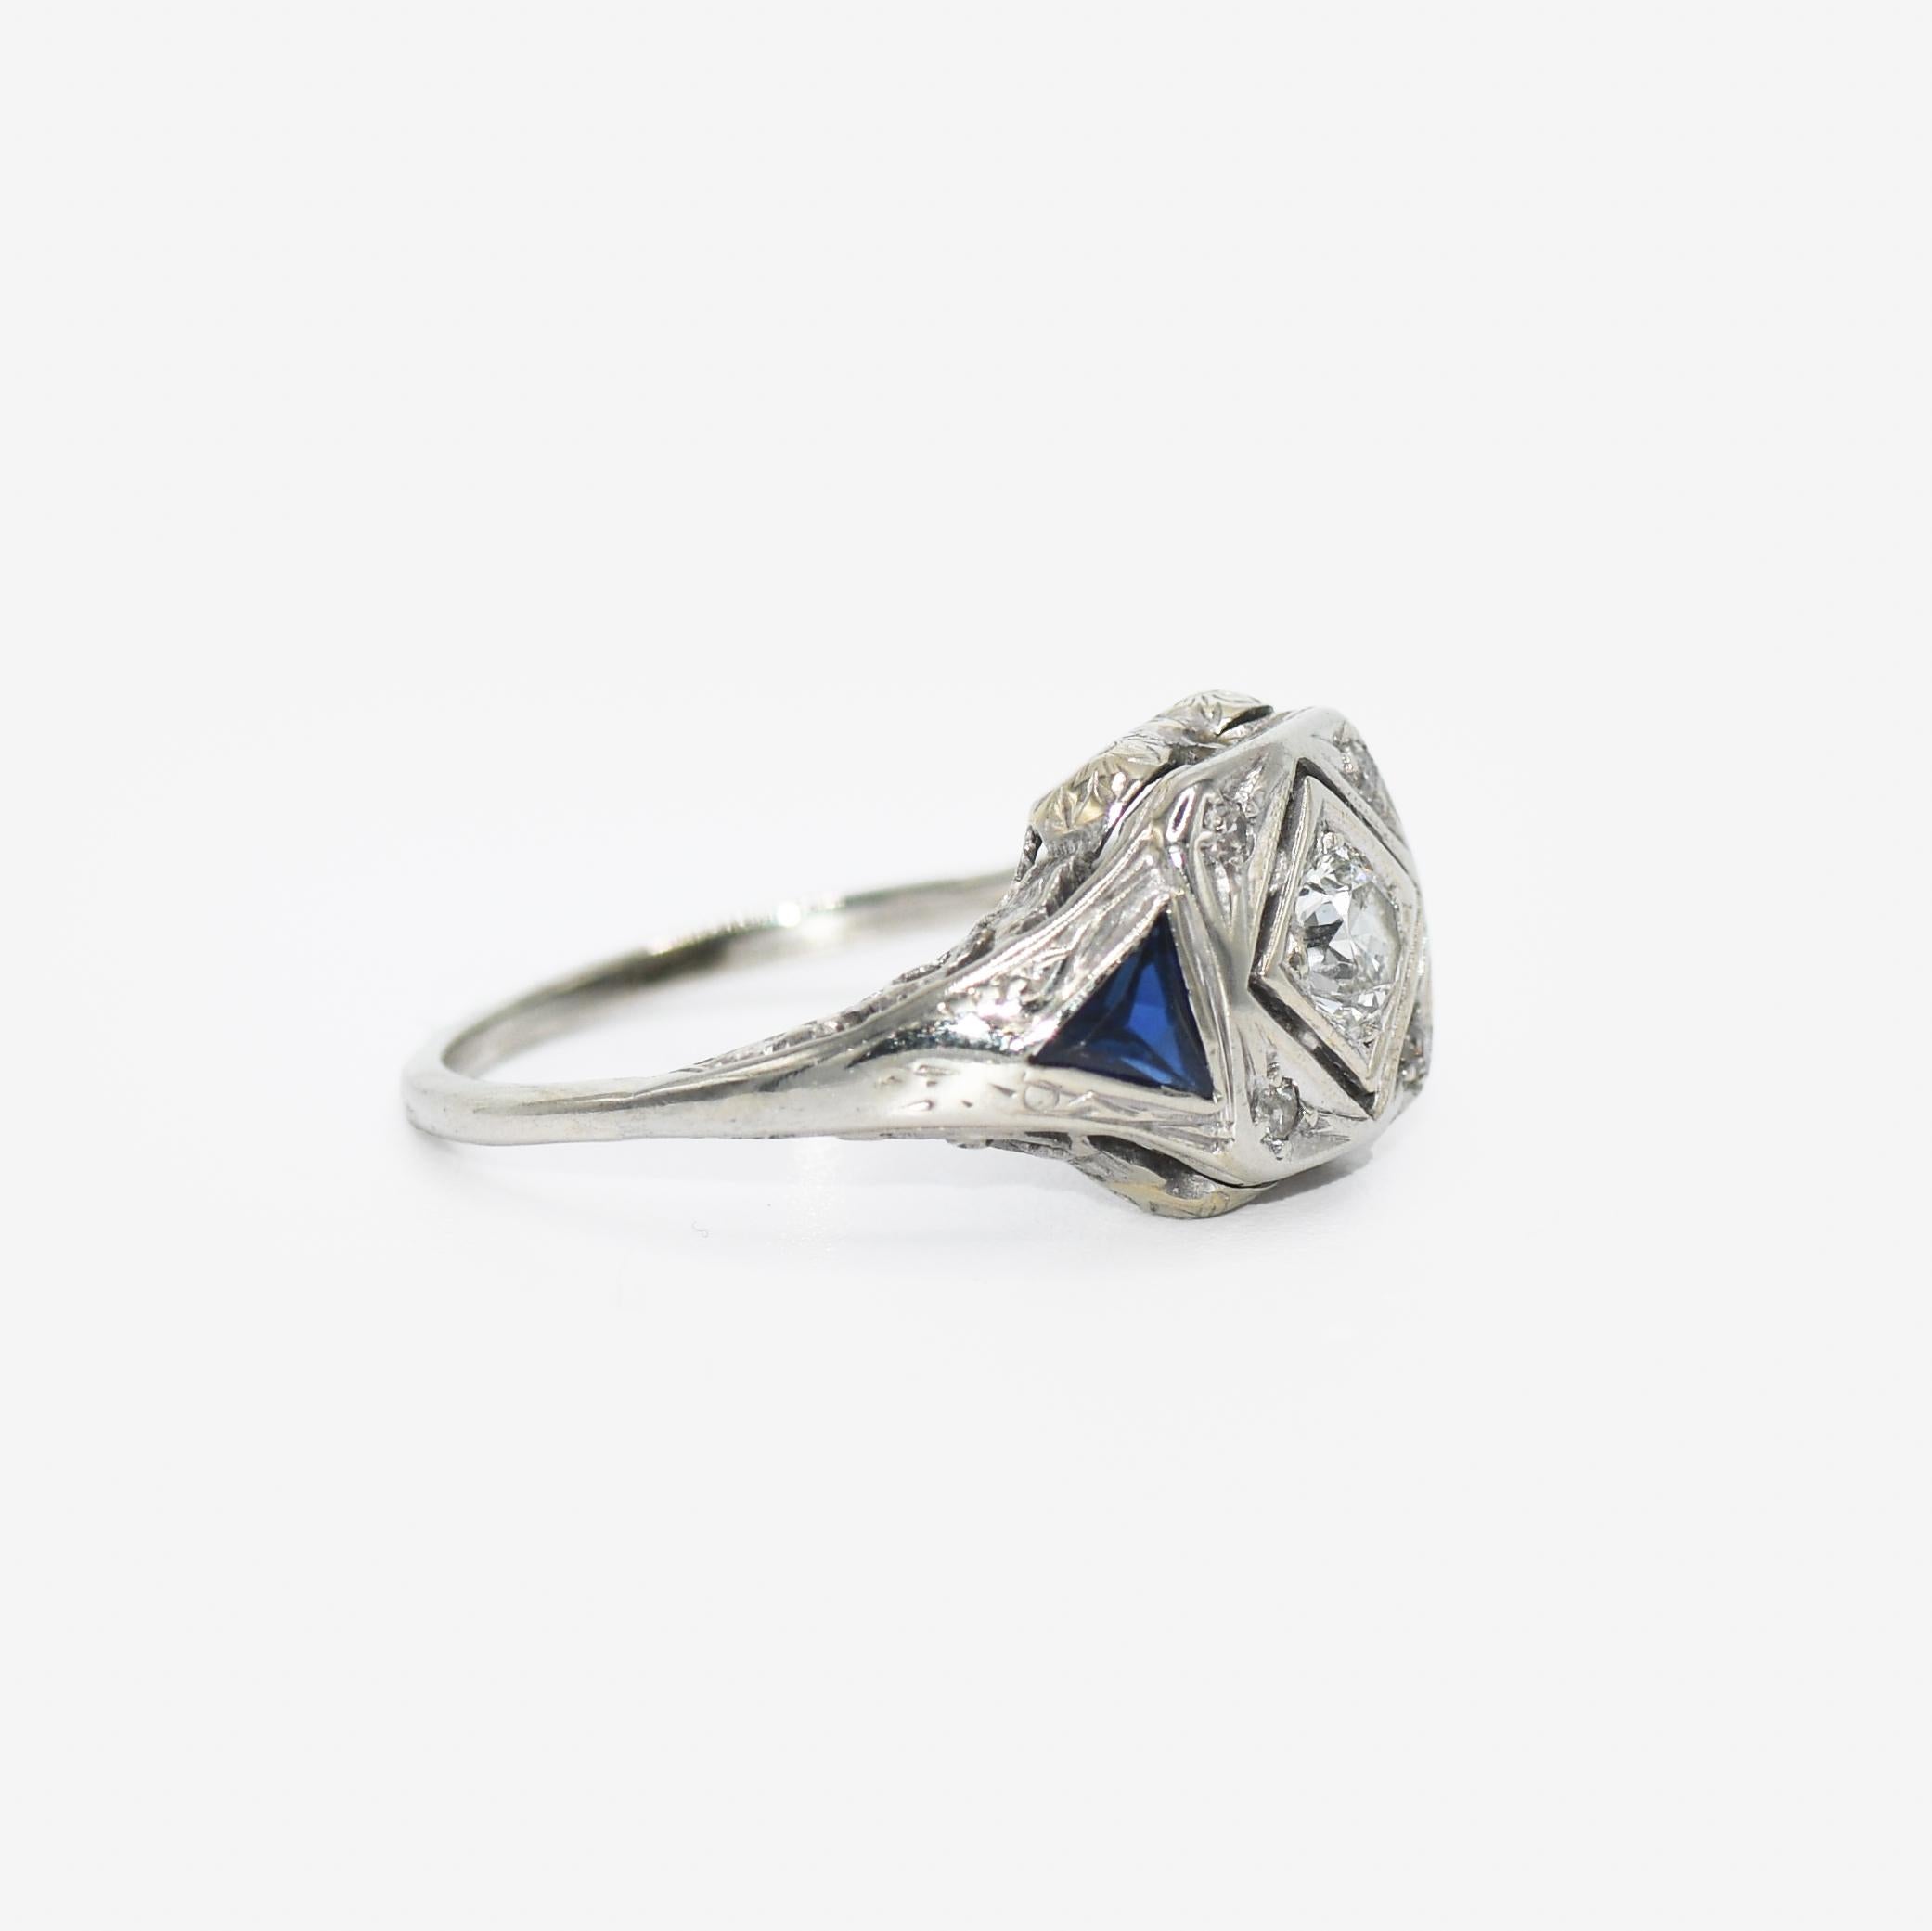 14K White Gold Art Deco Diamond Ring 0.23ct, 2.7g
Ladies vintage art deco diamond and blue spinel ring in 14k white gold setting.
Tests 14k with an electronic tester and weighs 2.7 grams.
The center stone is a transition cut, round diamond, .23